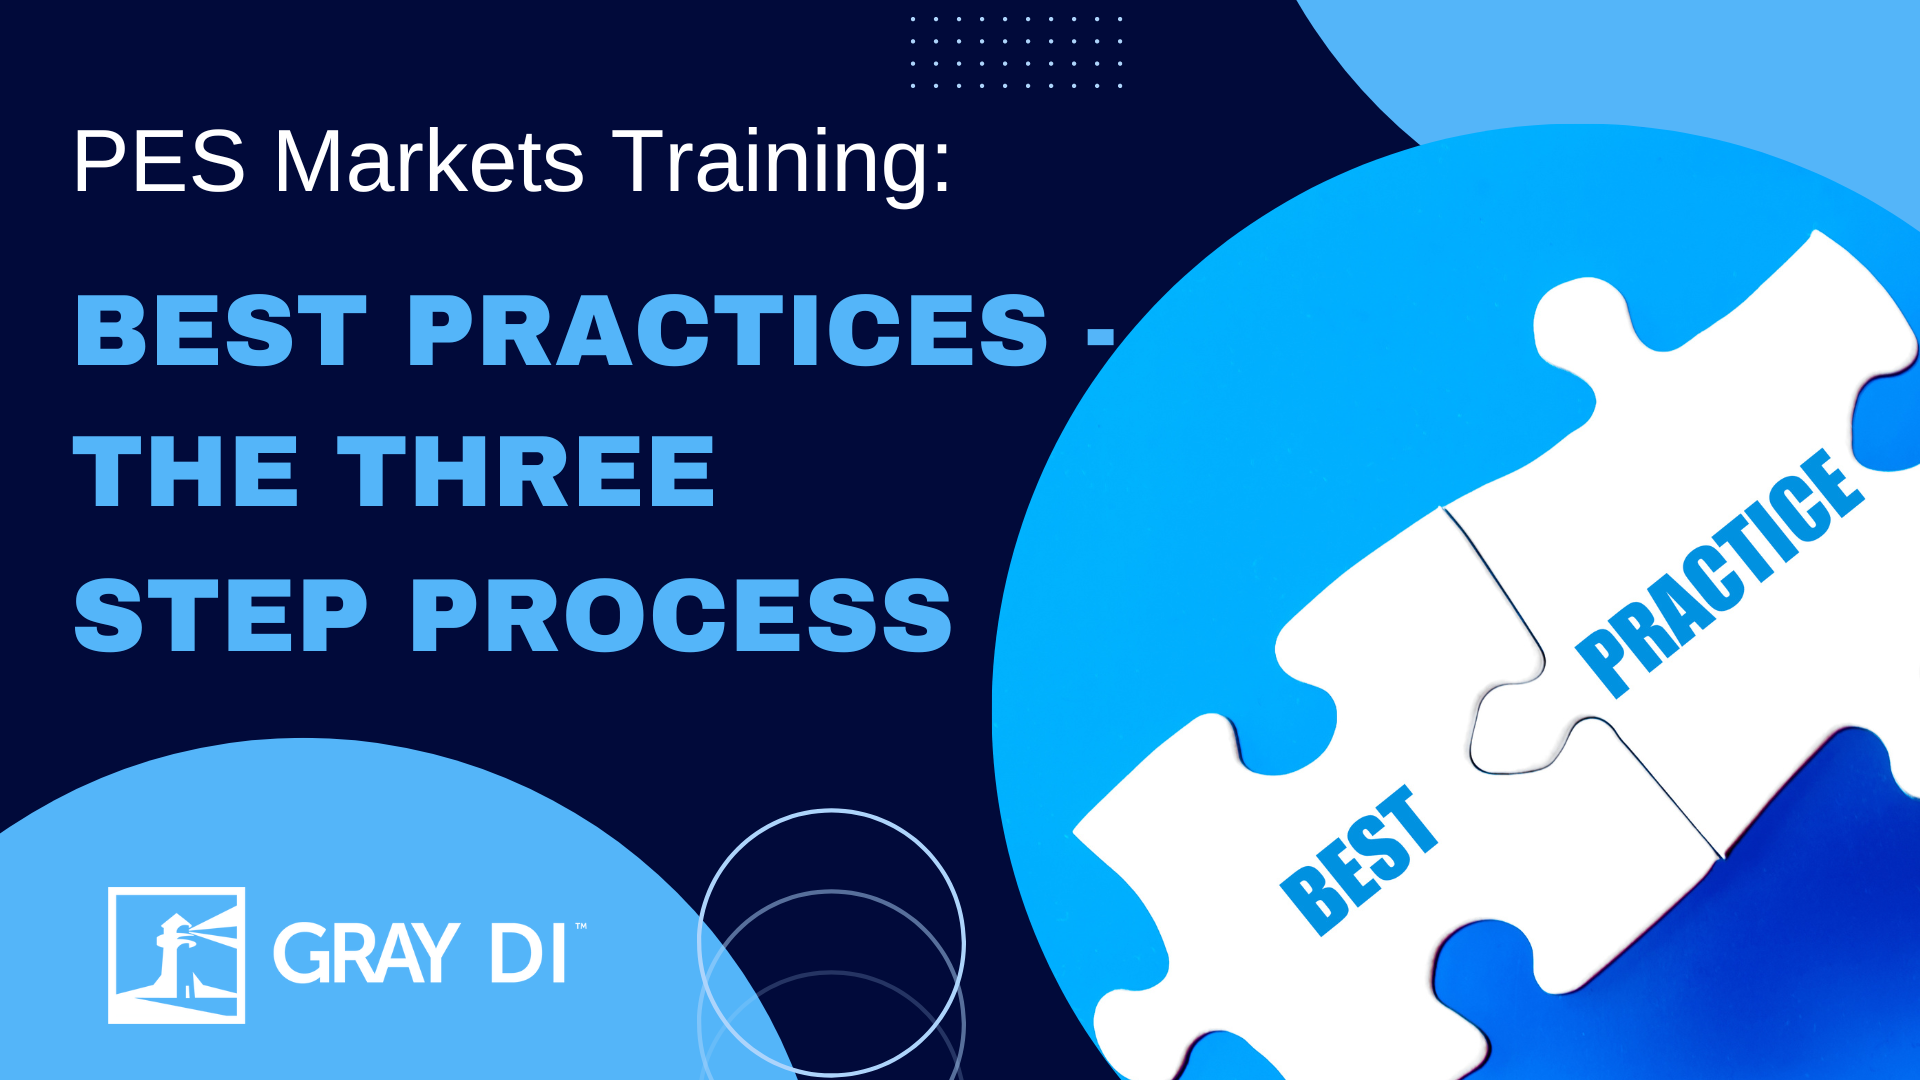 PES Markets Best Practices- The Three Step Process